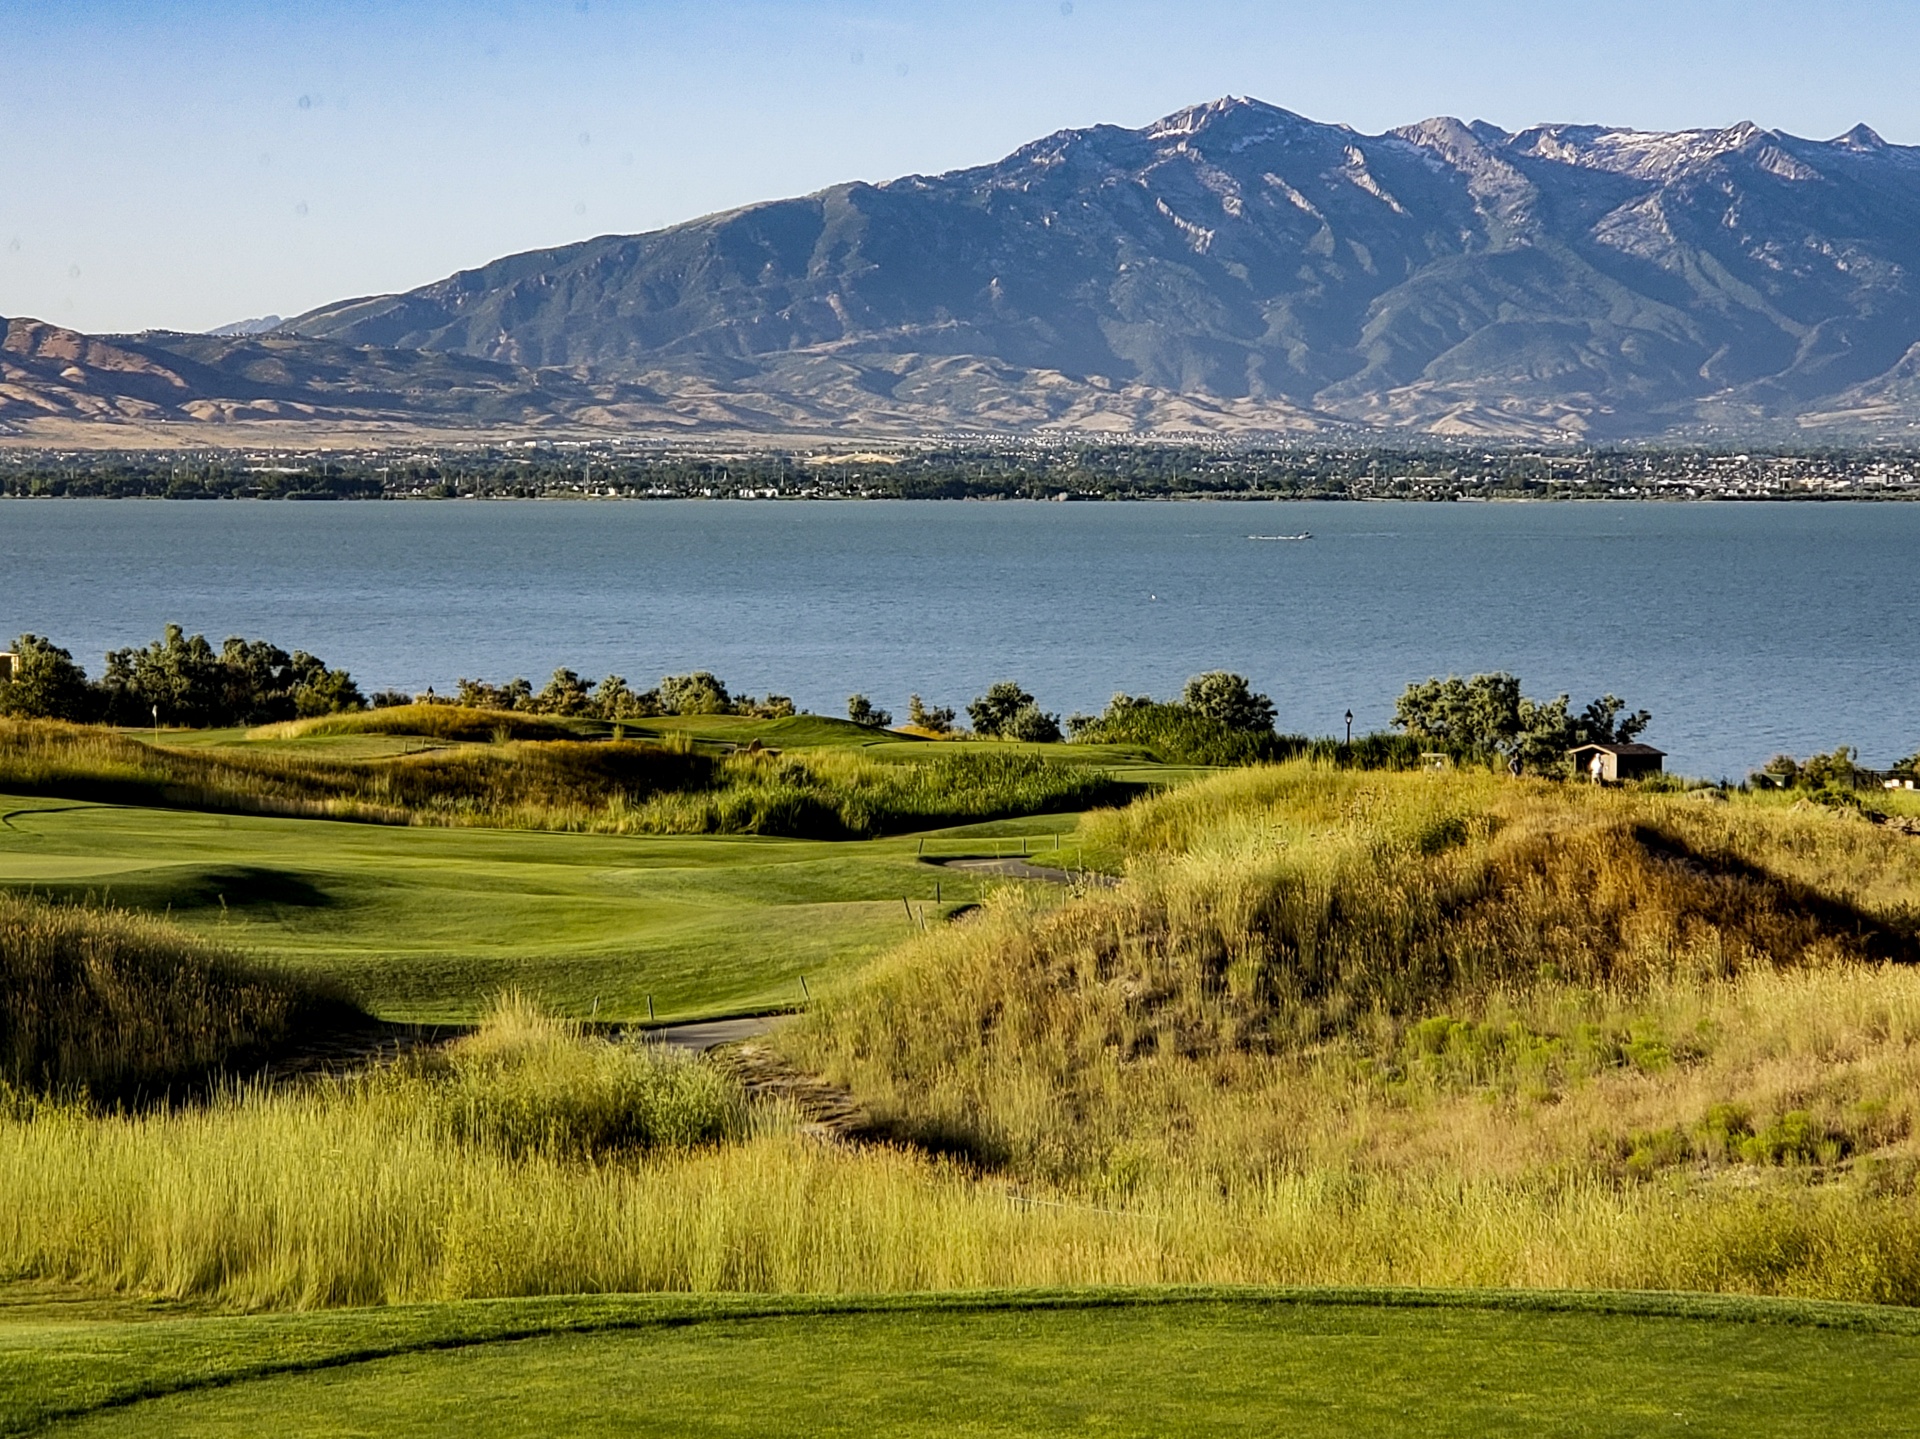 Golf Course overlooking a lake and mountains